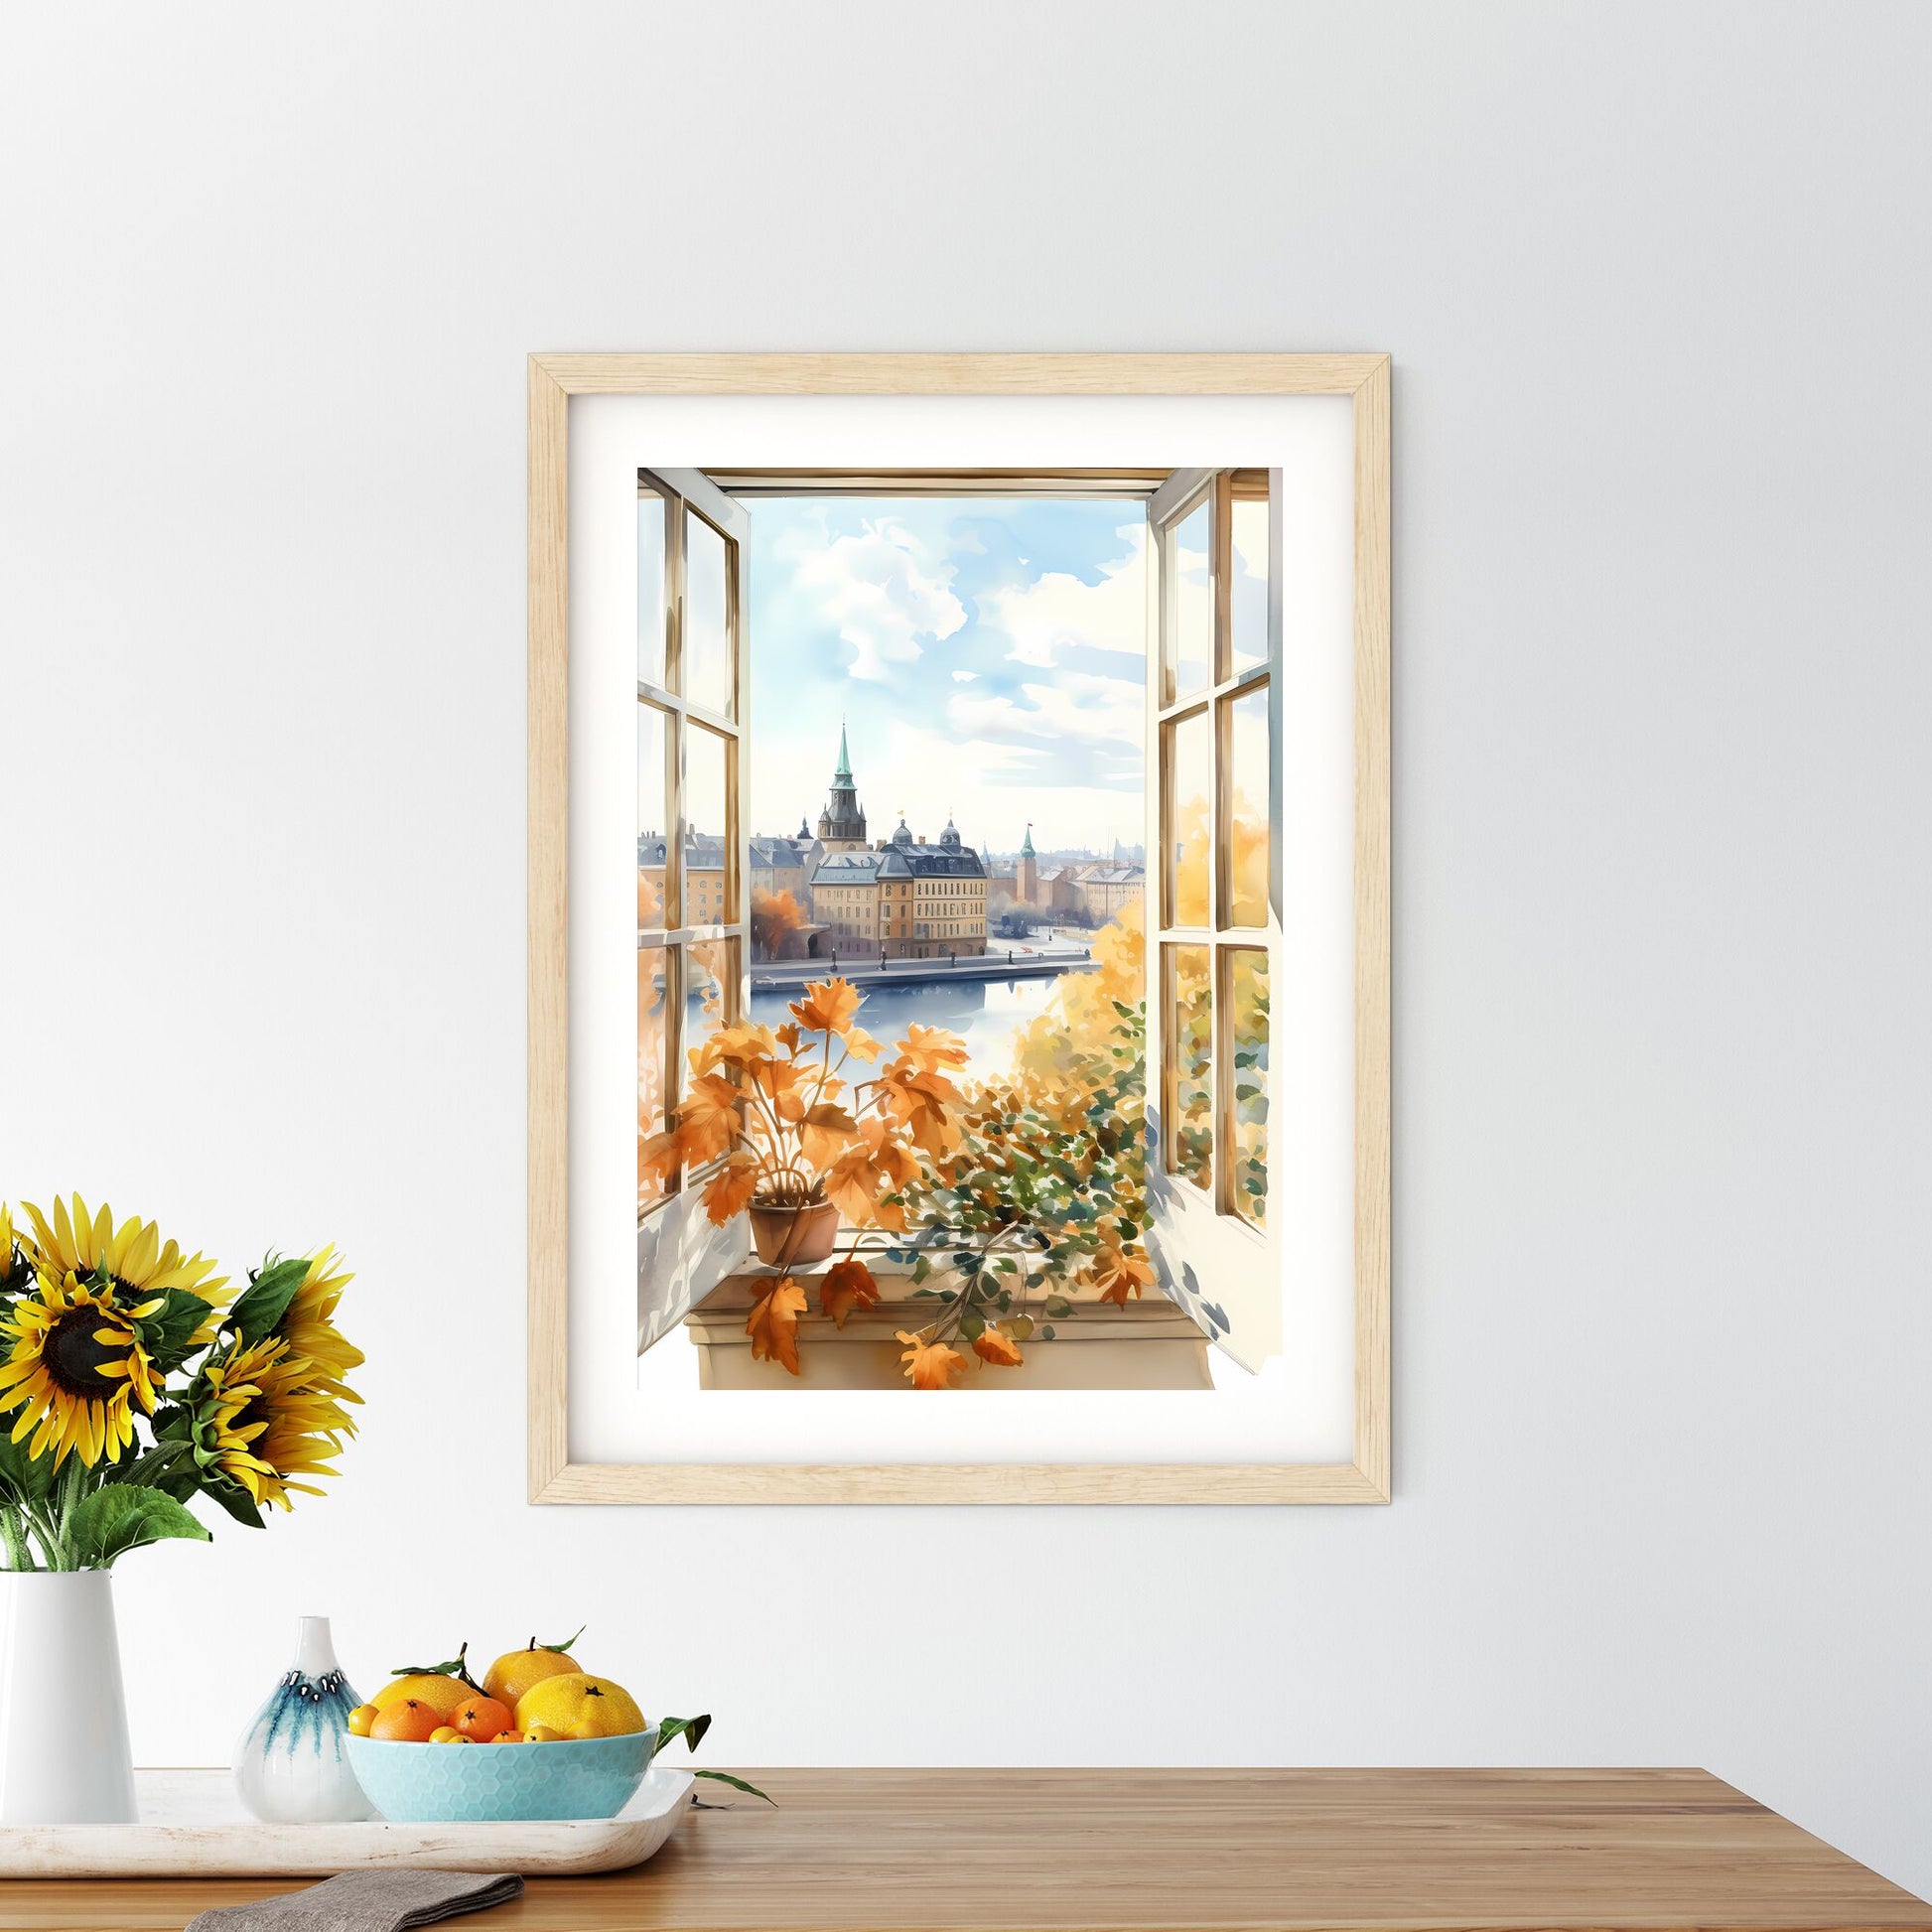 Watercolor Painting Of A Window With A View Of A City And A River Art Print Default Title